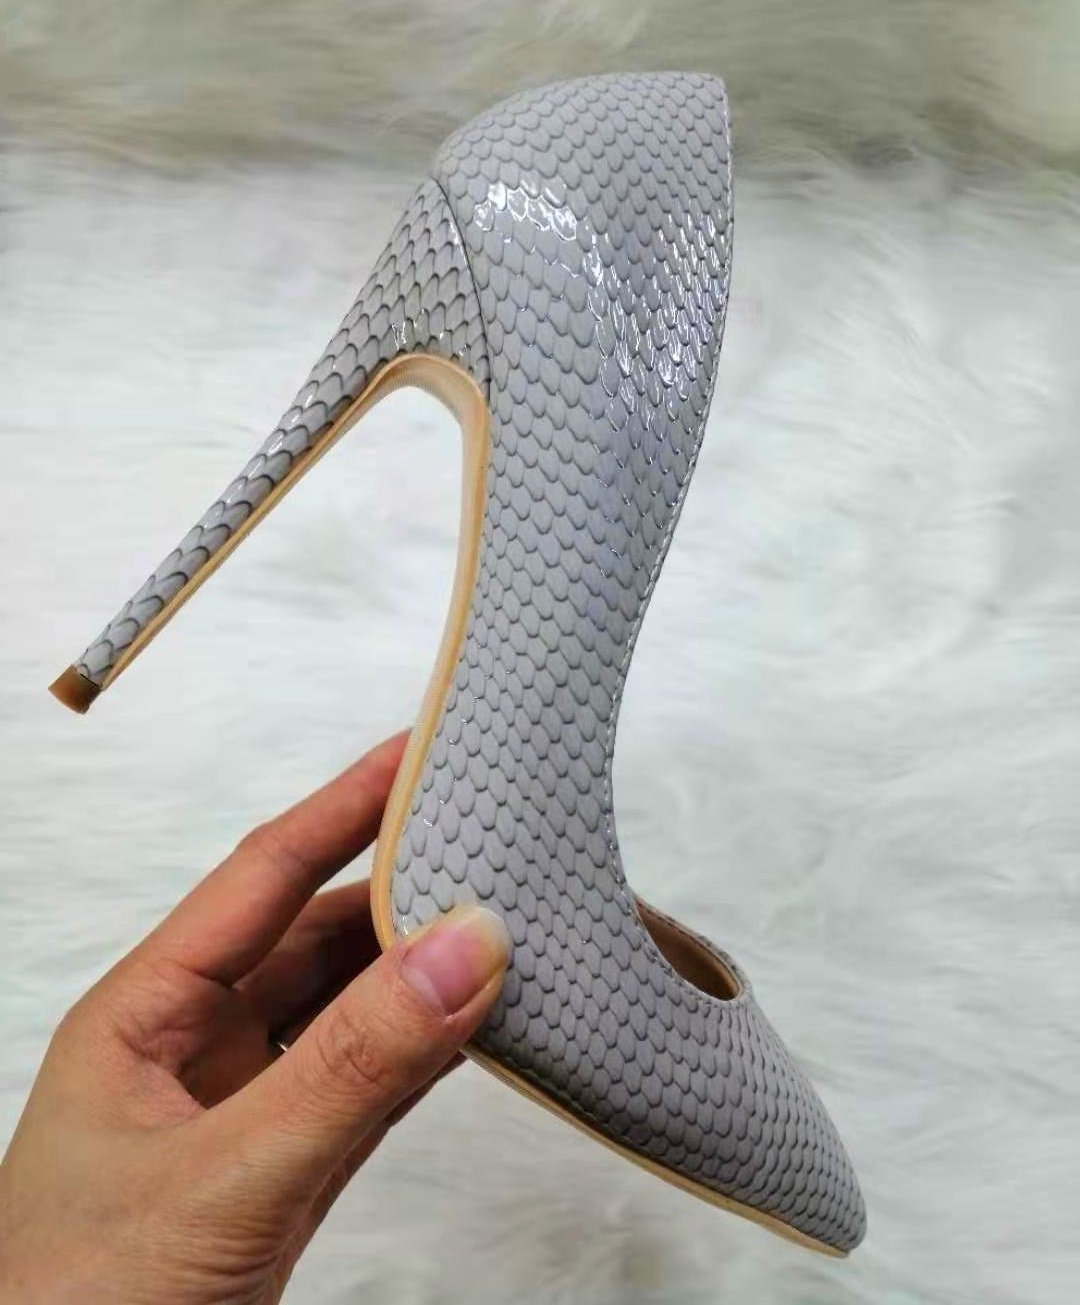 High-heels with snakeskin patterns, Fashion Evening Party Shoes, yy20-2